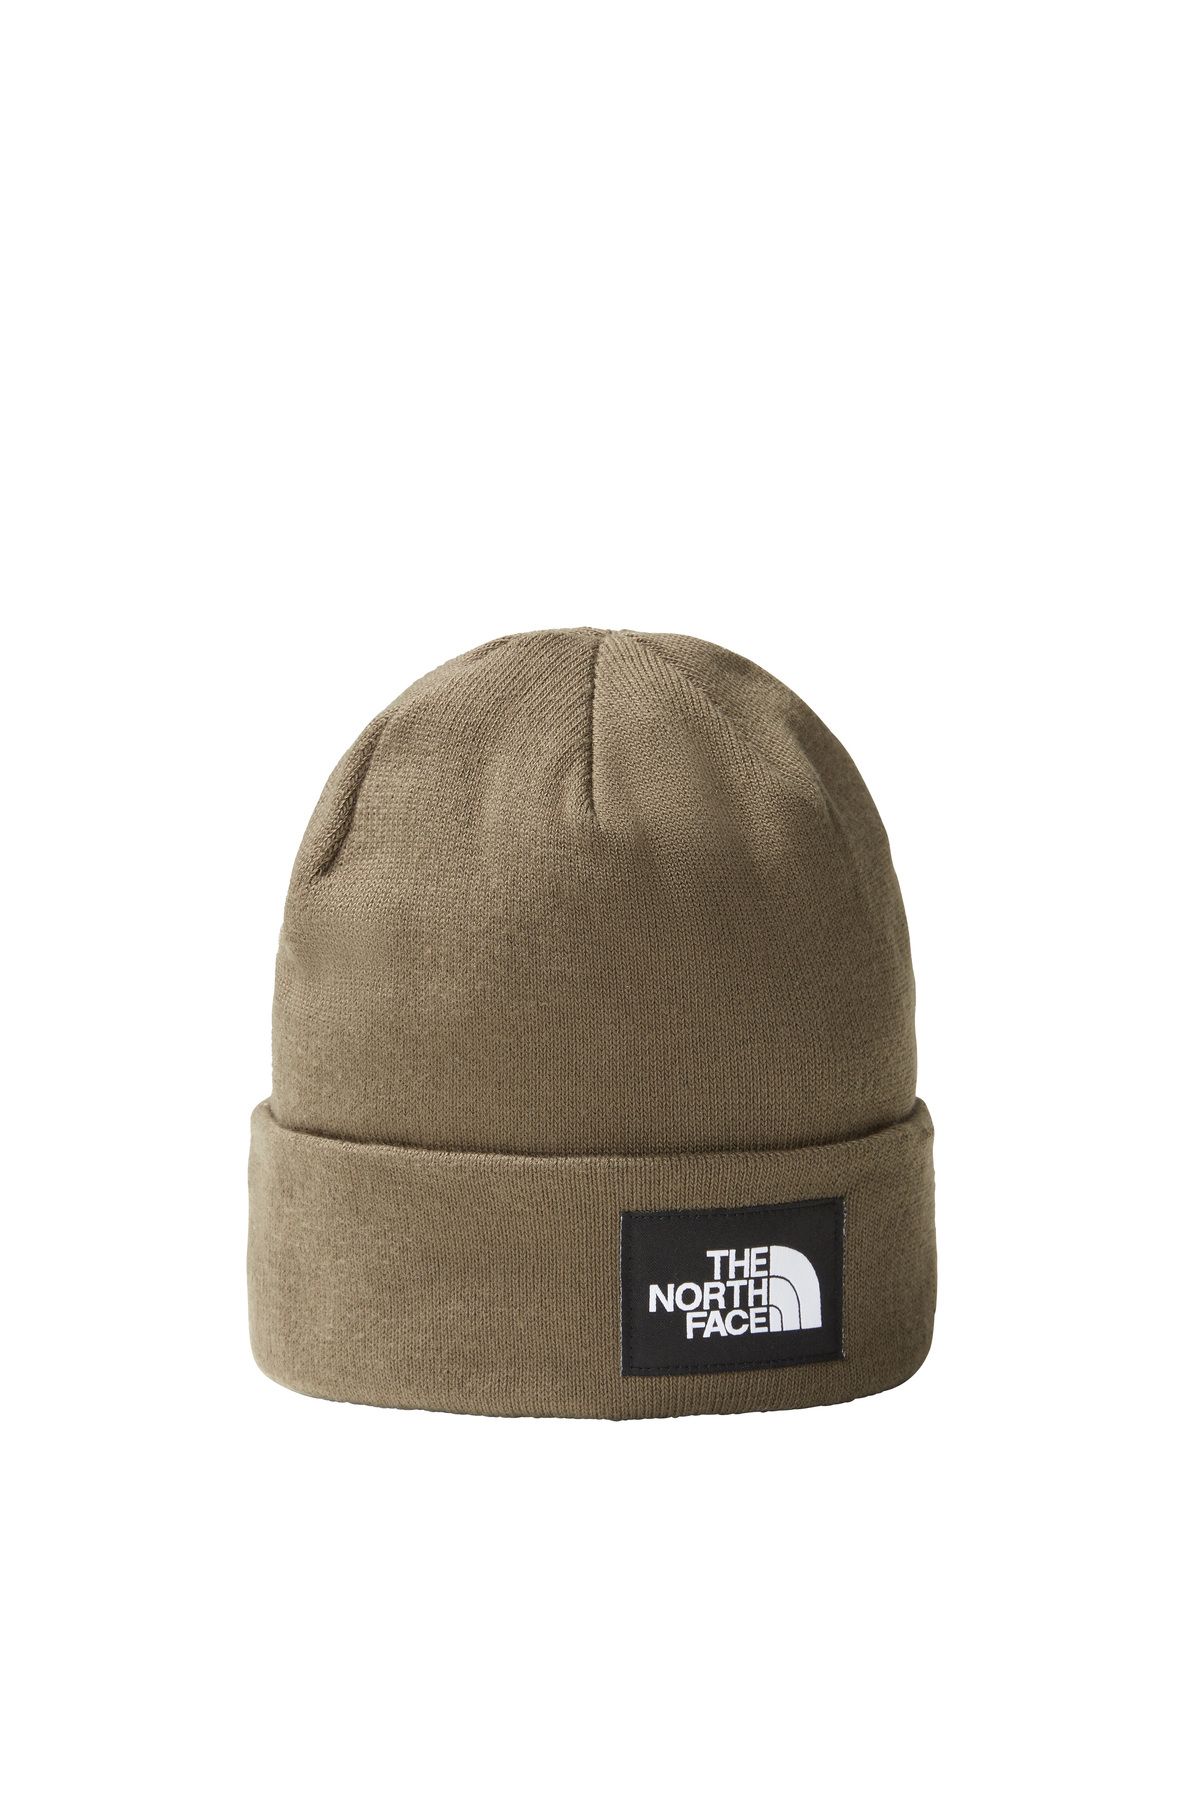 The North Face Dock Worker Recycled Beanıe Unisex Yeşil Bere Nf0a3fnt21l1